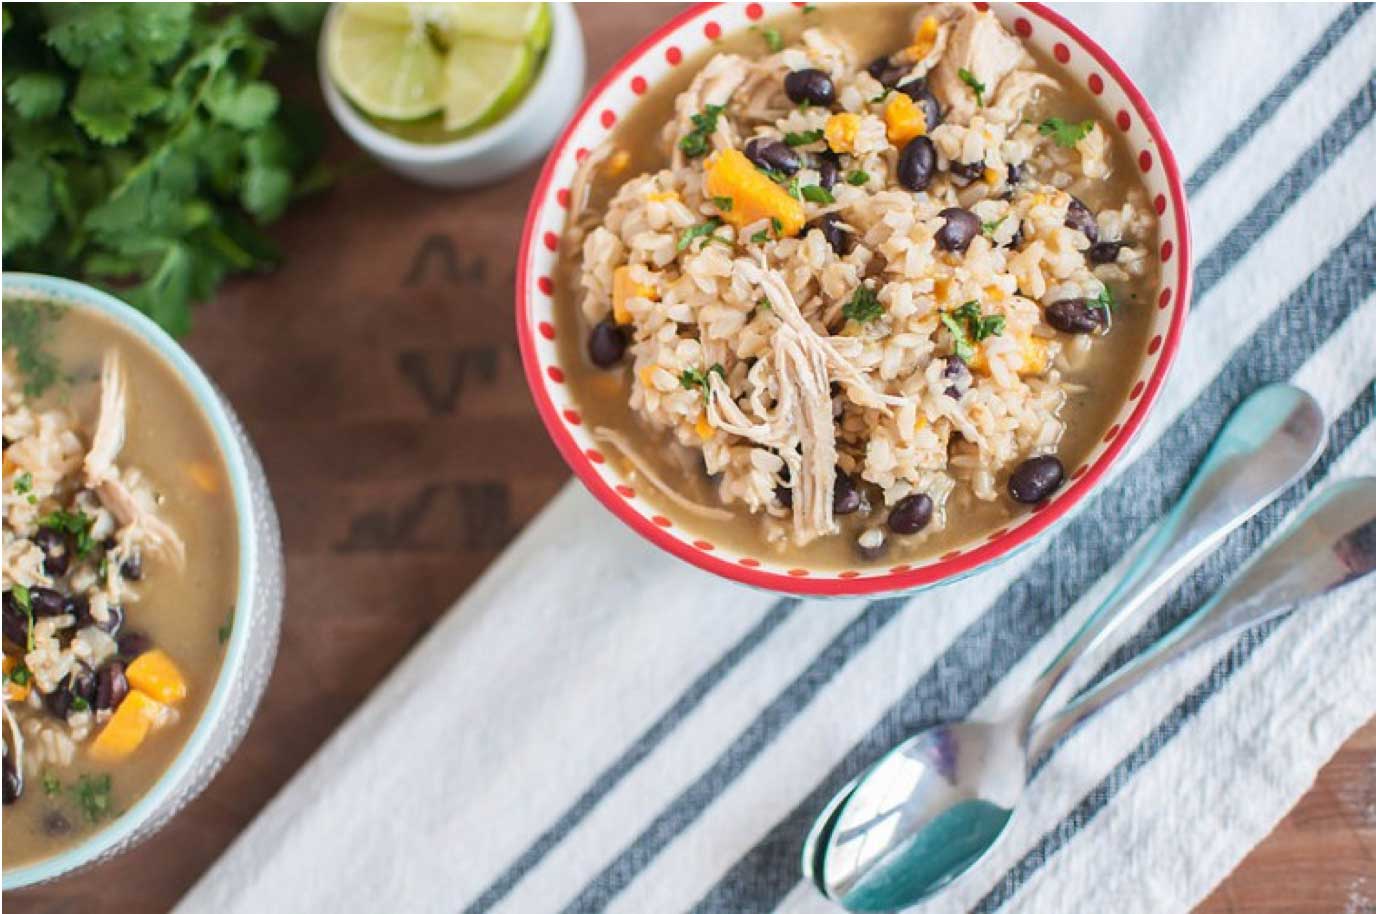 What a great twist on stew - Instant Pot Mexican Chicken Stew from Meg at Meg's Everyday Indulgence! Just one of the beef, chicken, fish and veggies stews we’ve lined up for you!